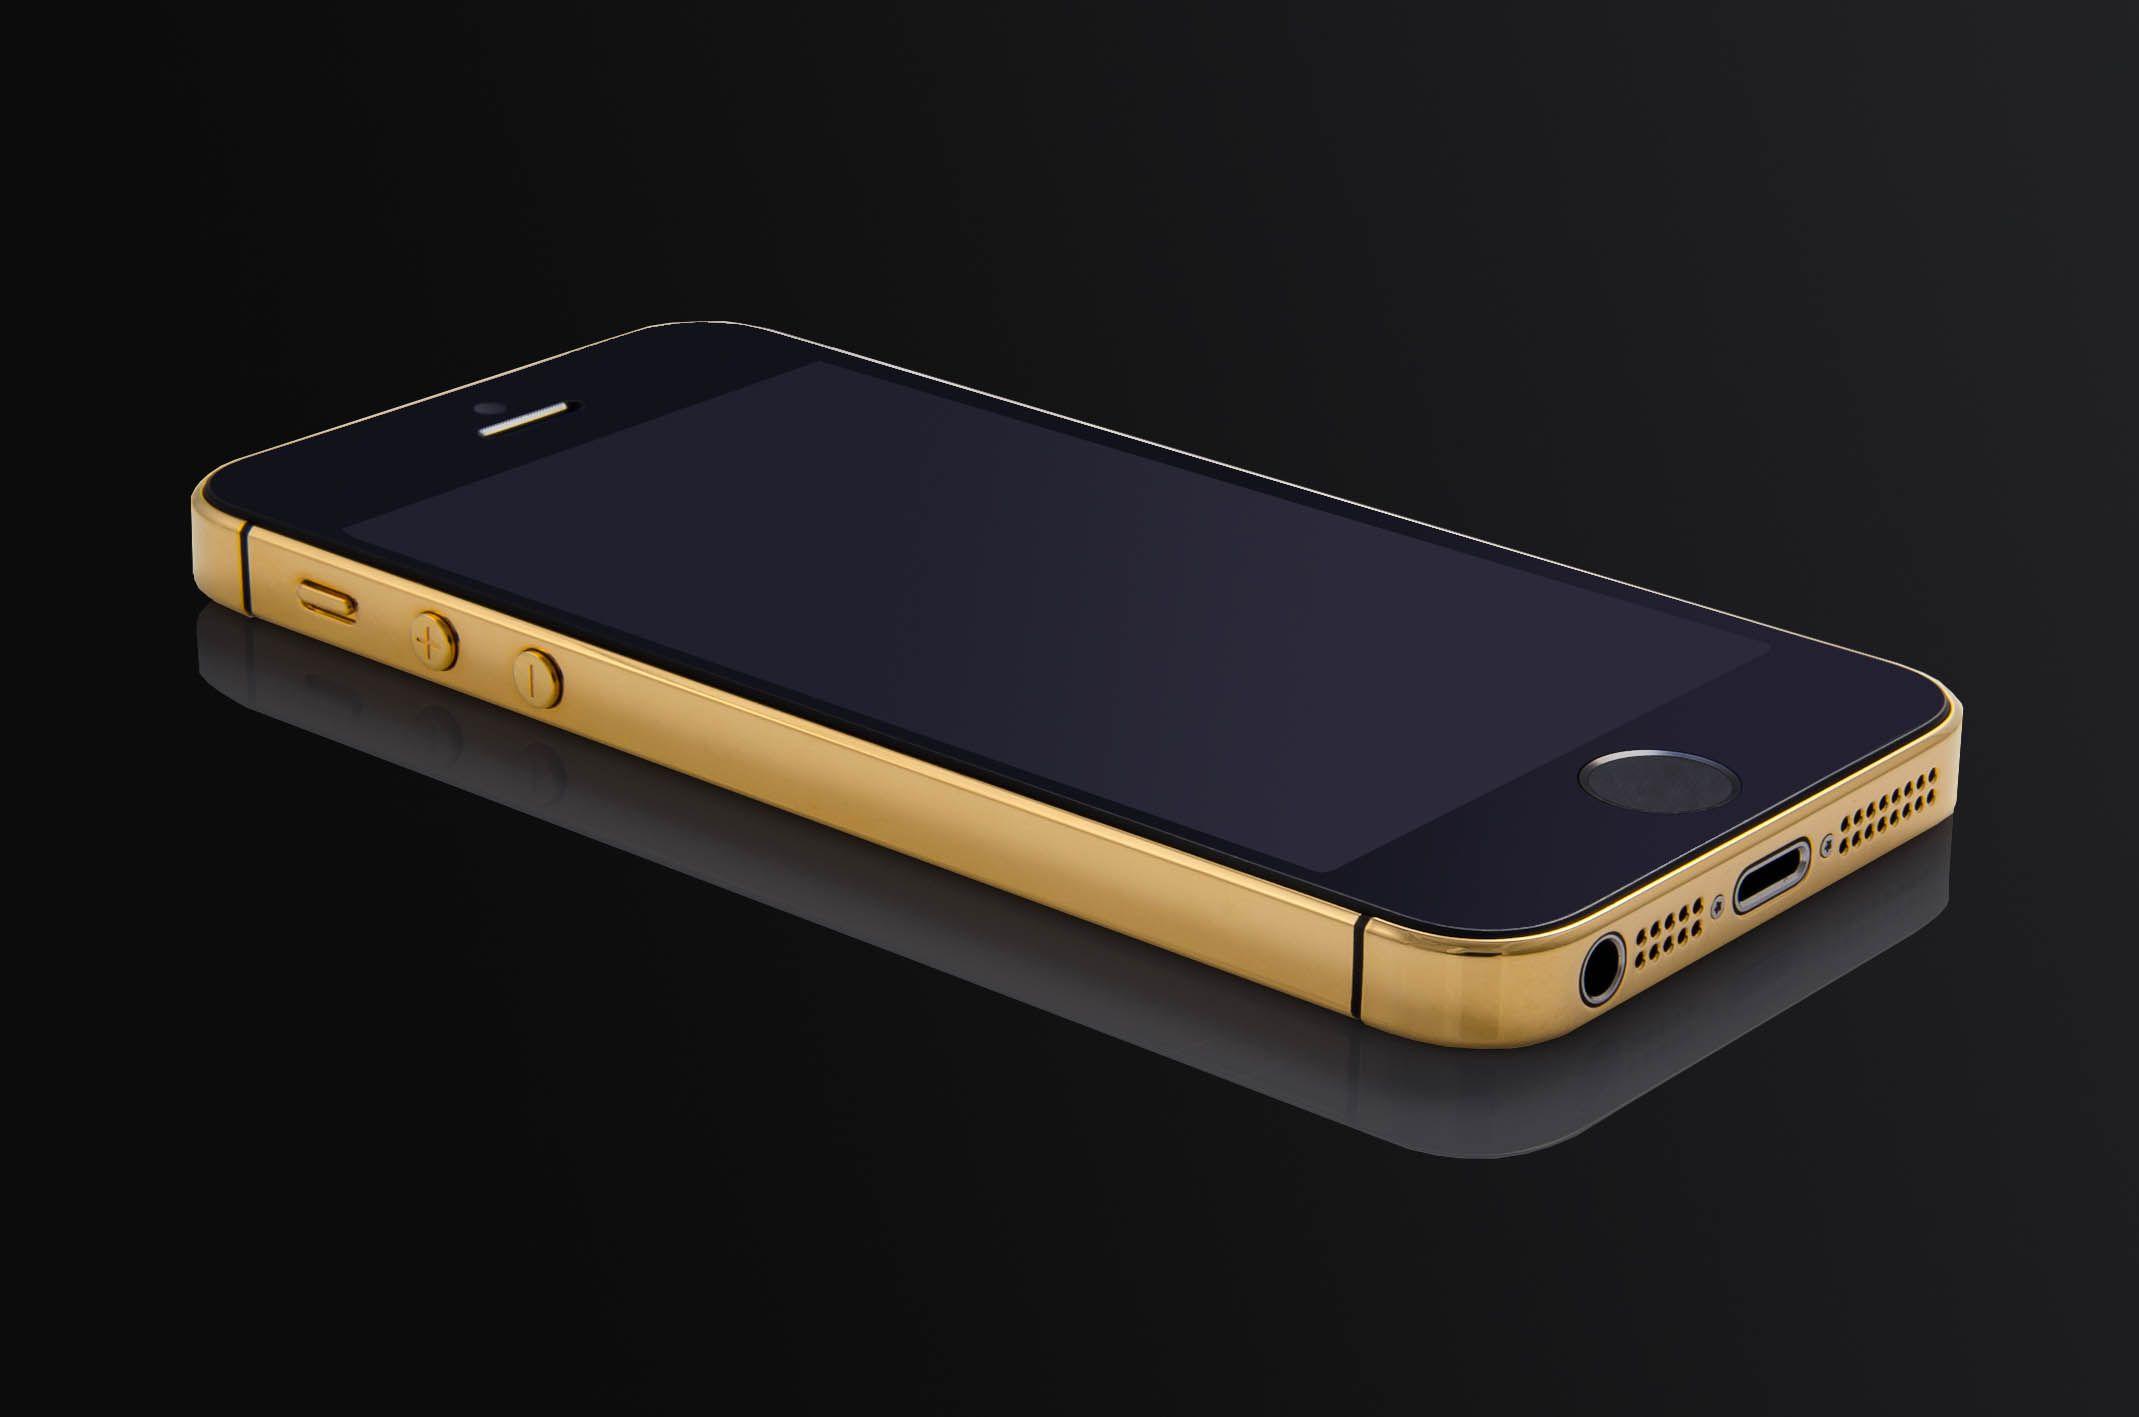 Diamond Apple Logo - LUX IPHONE 5S IN BLACK FINISHED IN 24K YELLOW GOLD WITH DIAMOND ...